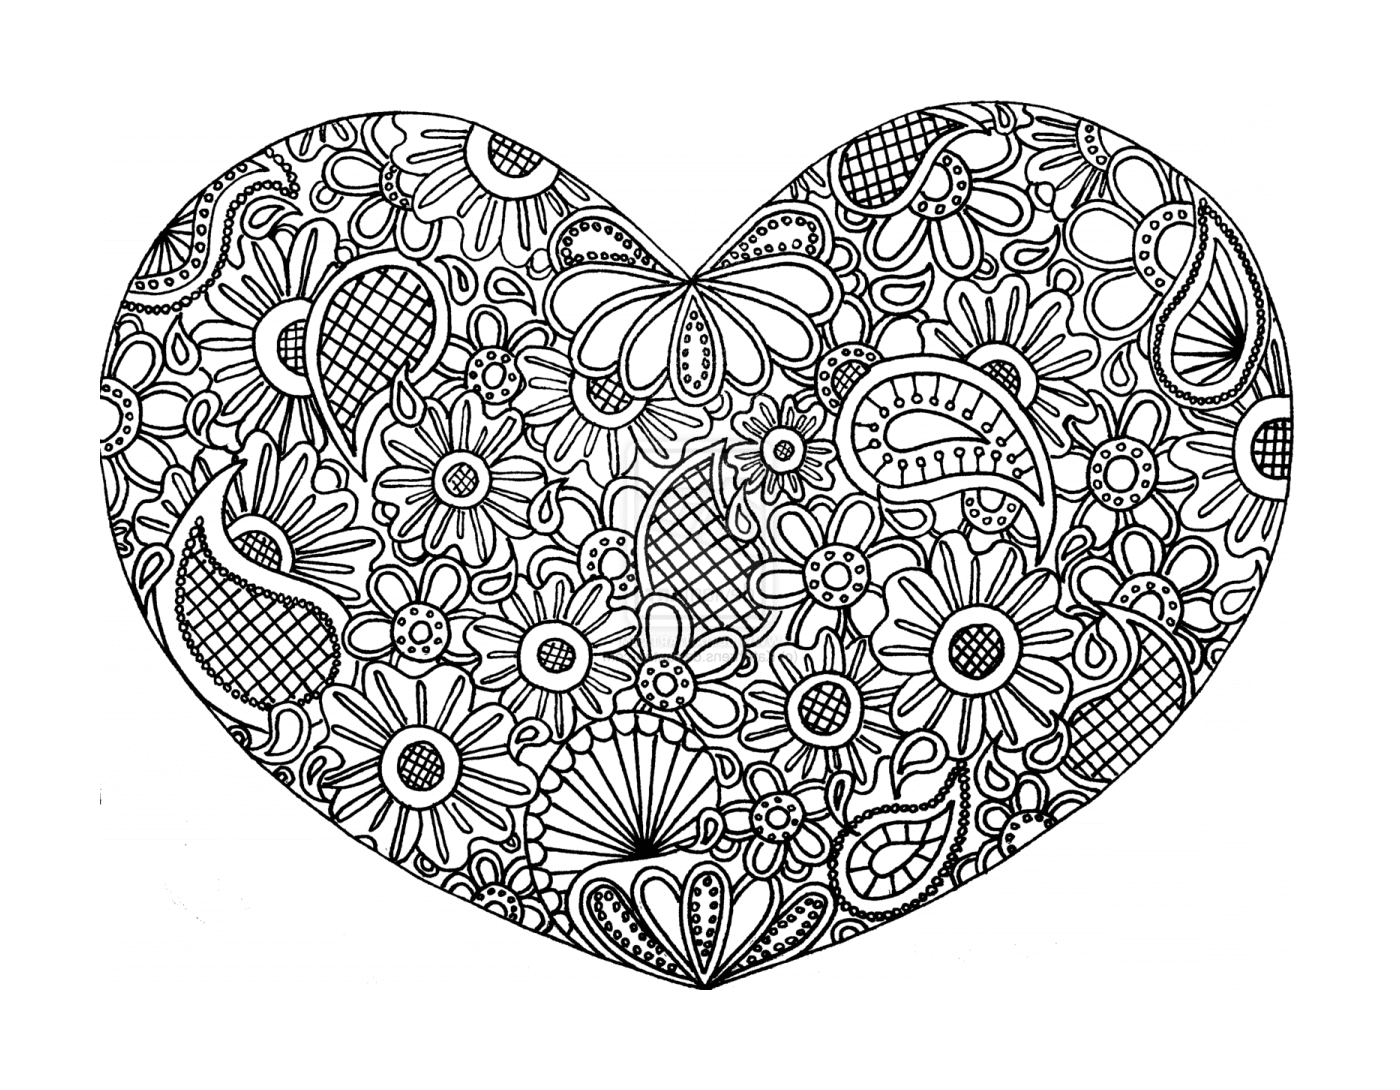  A floral heart in black and white 